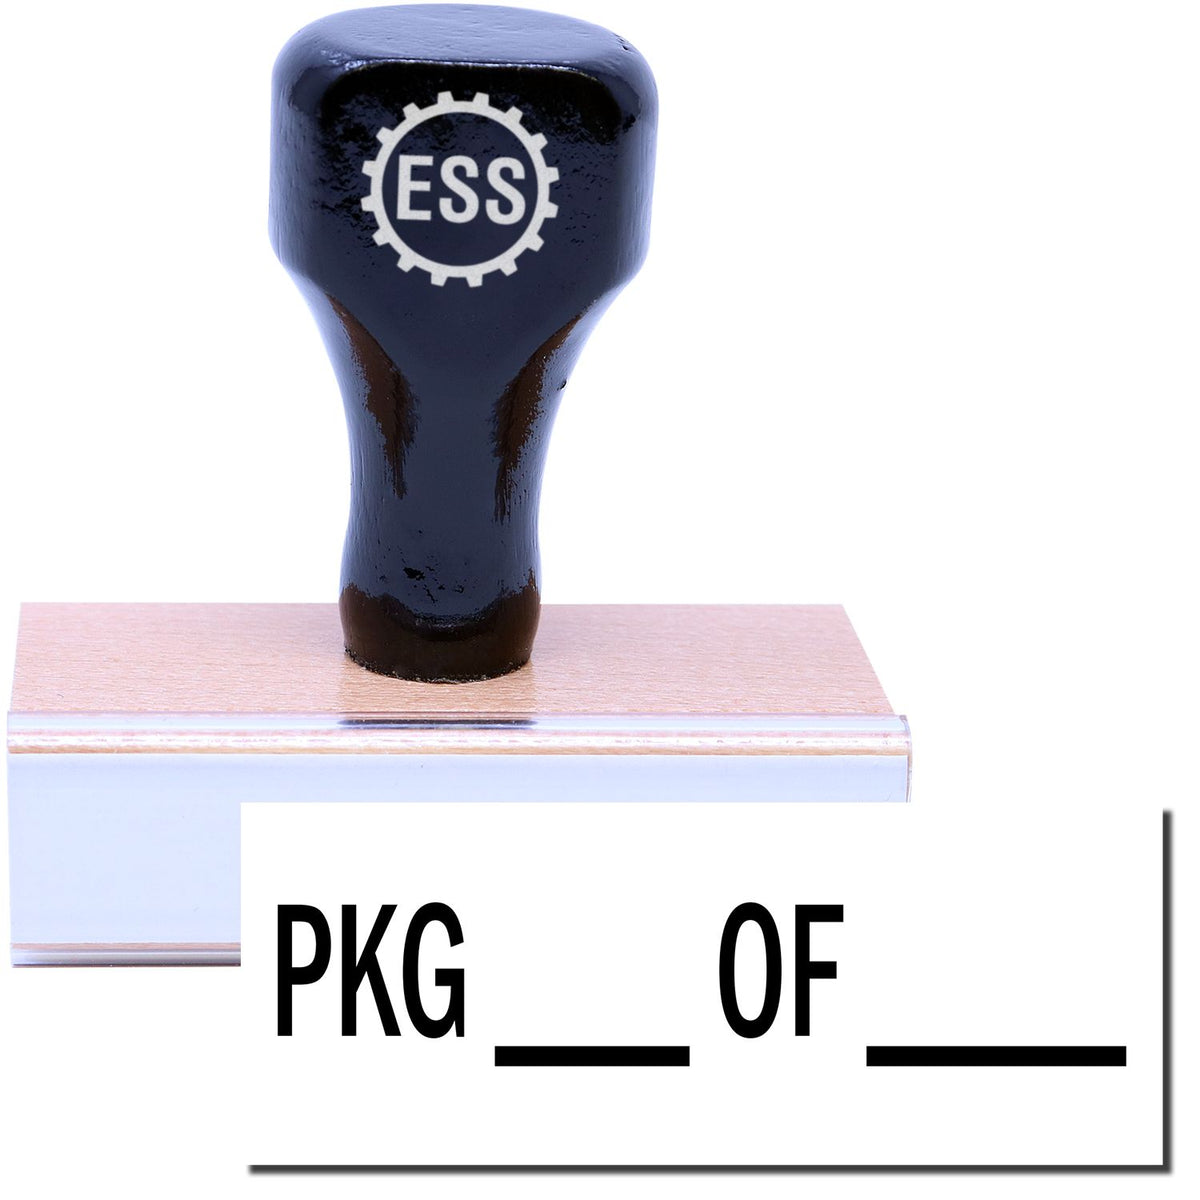 A stock office rubber stamp with a stamped image showing how the text &quot;PKG ___ OF ____&quot; in a large font is displayed after stamping.